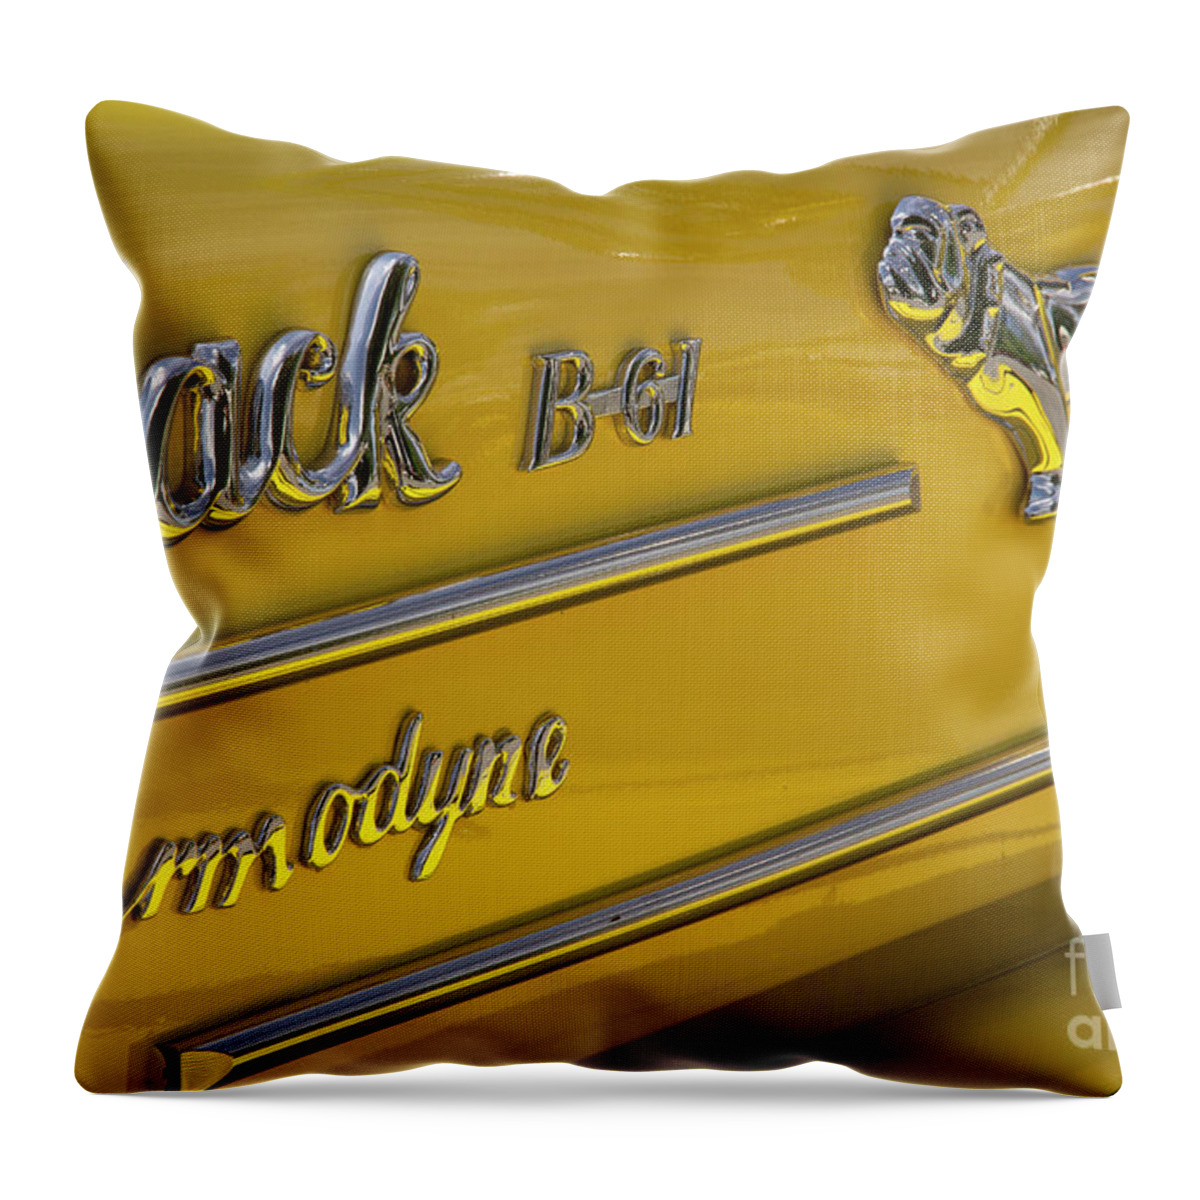 Mack Truck Throw Pillow featuring the photograph Mack B-61 by Mike Eingle